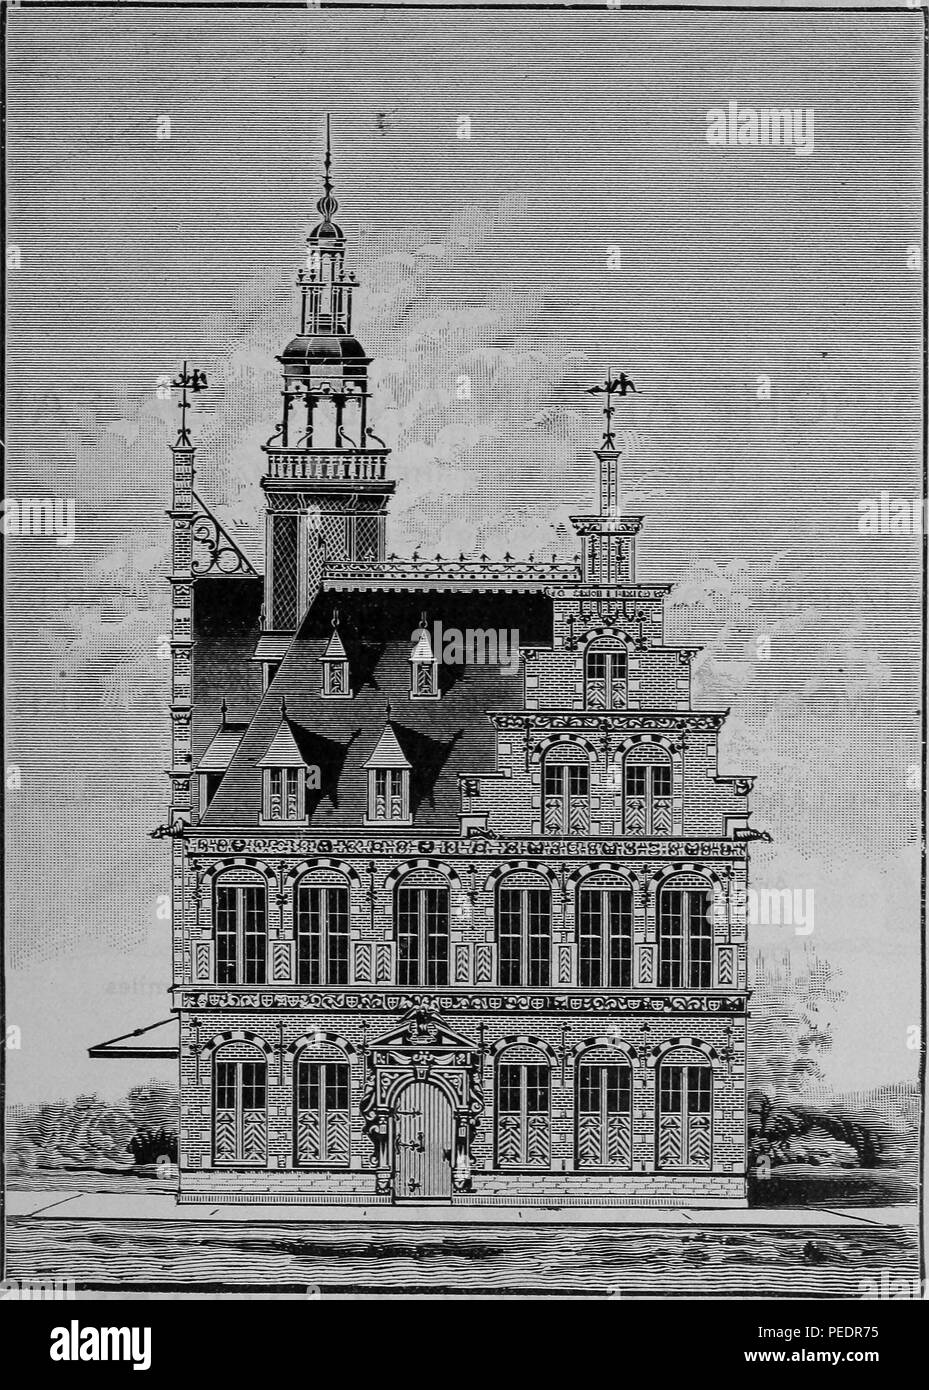 Black and white print advertising the Van Houten's Cocoa Building, a brick-faced Victorian structure located on the NE corner of Manufactures and the Liberal Arts Building, at the World's Columbian Exposition aka the Chicago World's Fair, located in Chicago Illinois, USA, published in 'The Official Directory of the World's Columbian Exposition', 1893. Courtesy Internet Archive. () Stock Photo